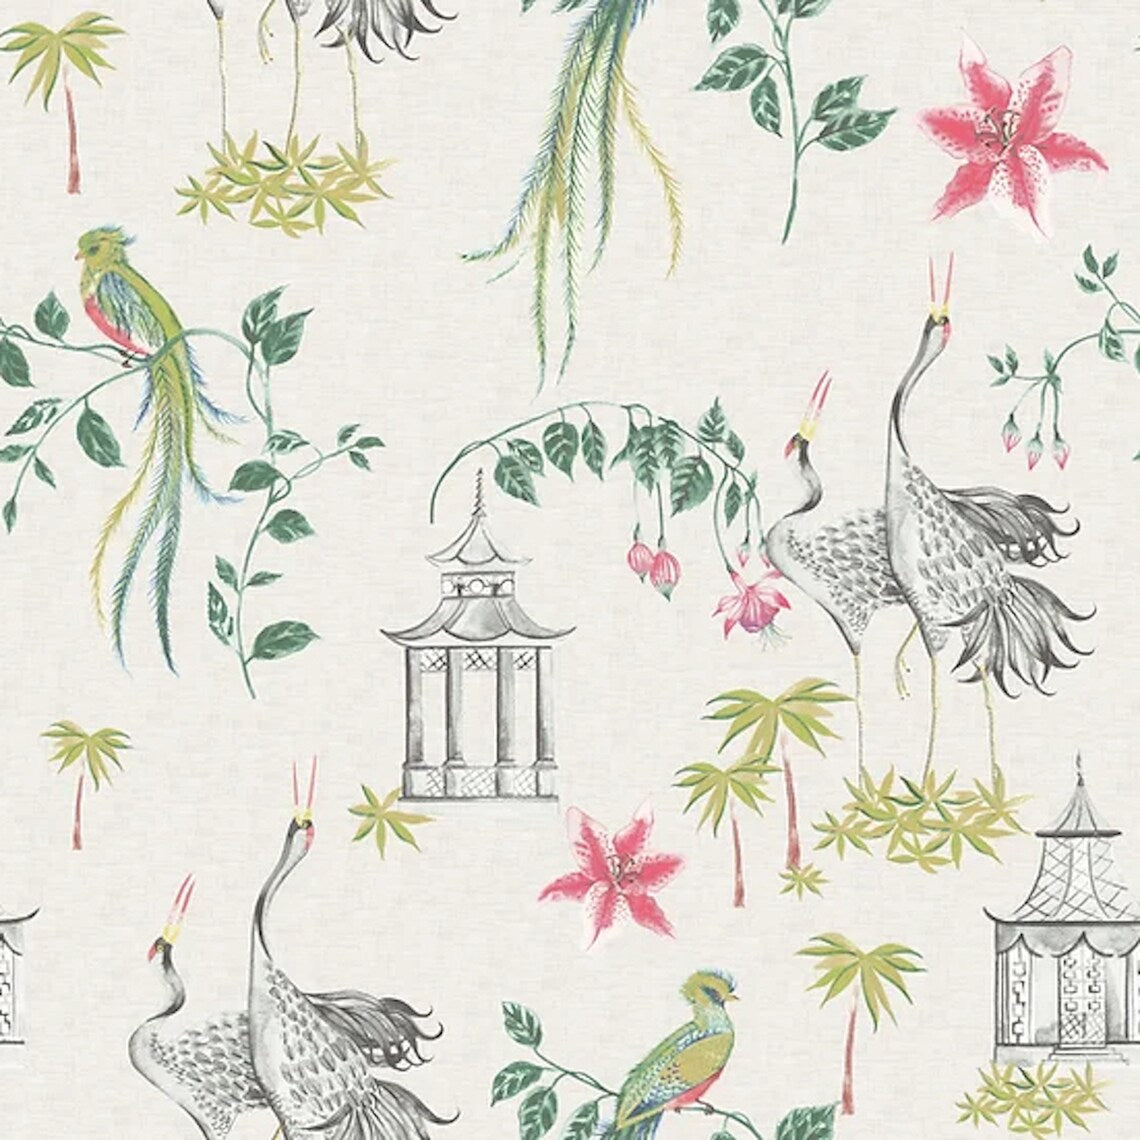 Bed Runner in Let It Crane Avocado Oriental Toile, Multicolor Chinoiserie